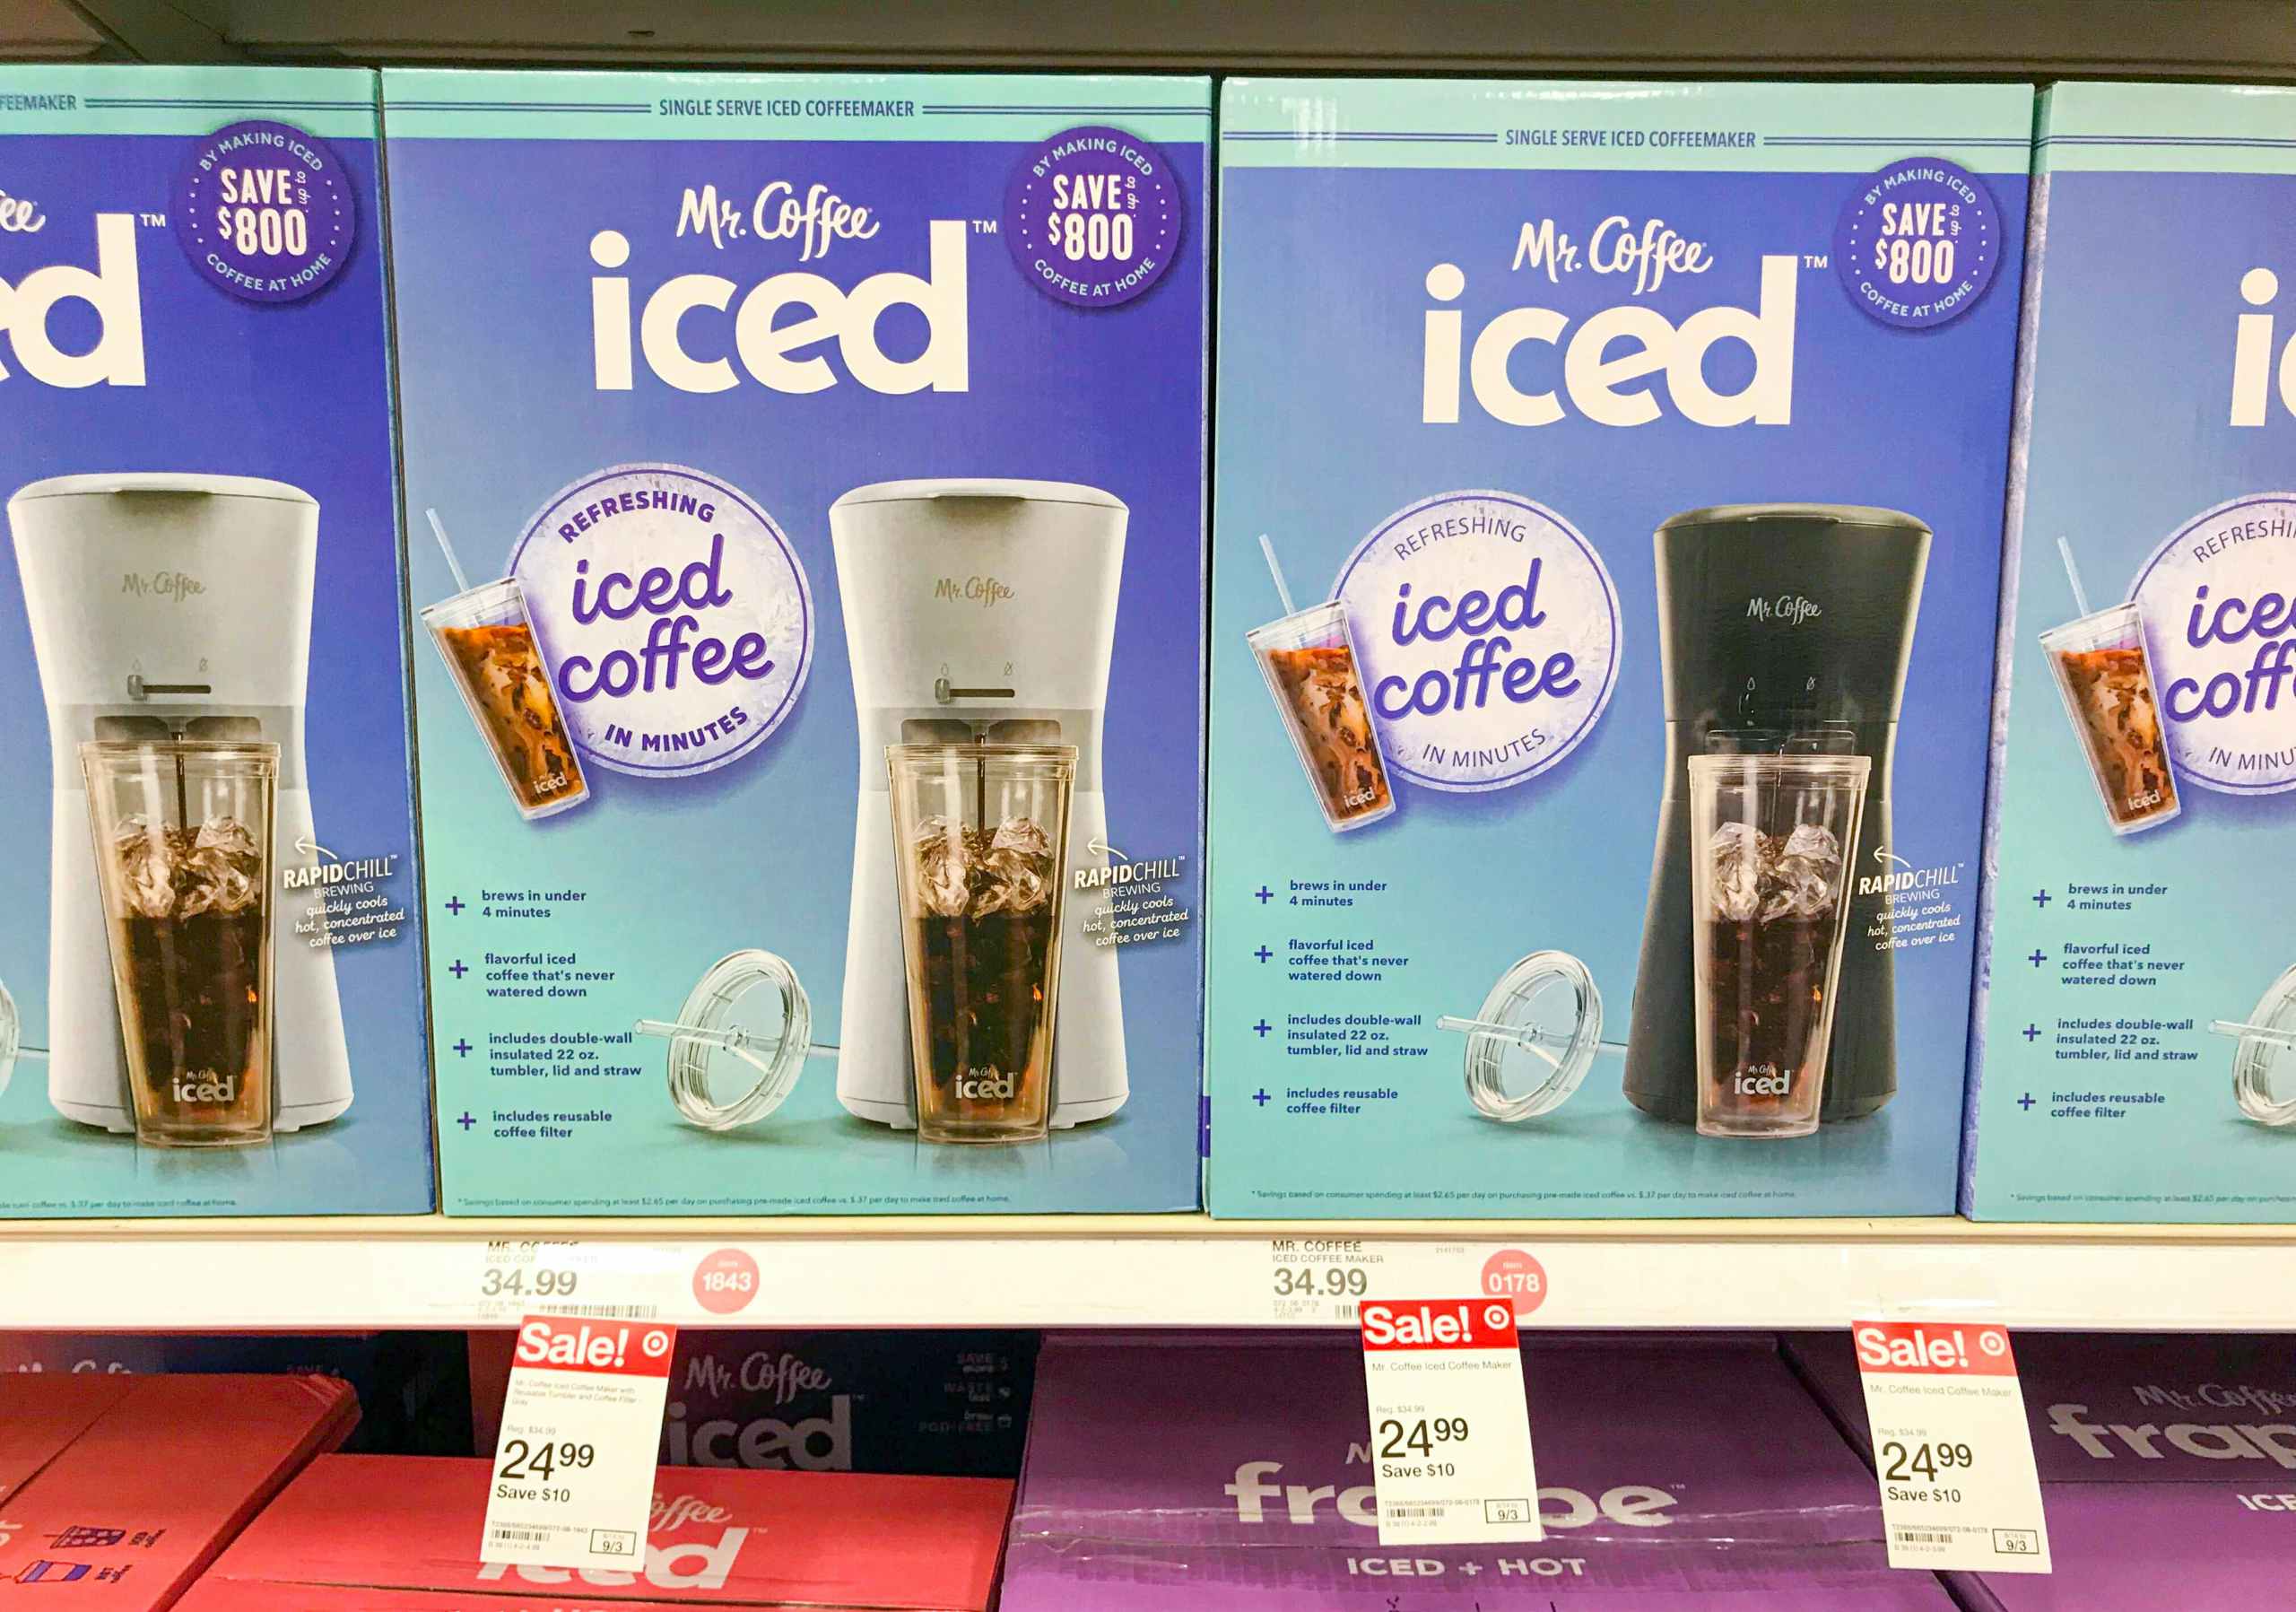 Mr. Coffee iced coffee makers in boxes sitting on Target shelf with sale price tag showing